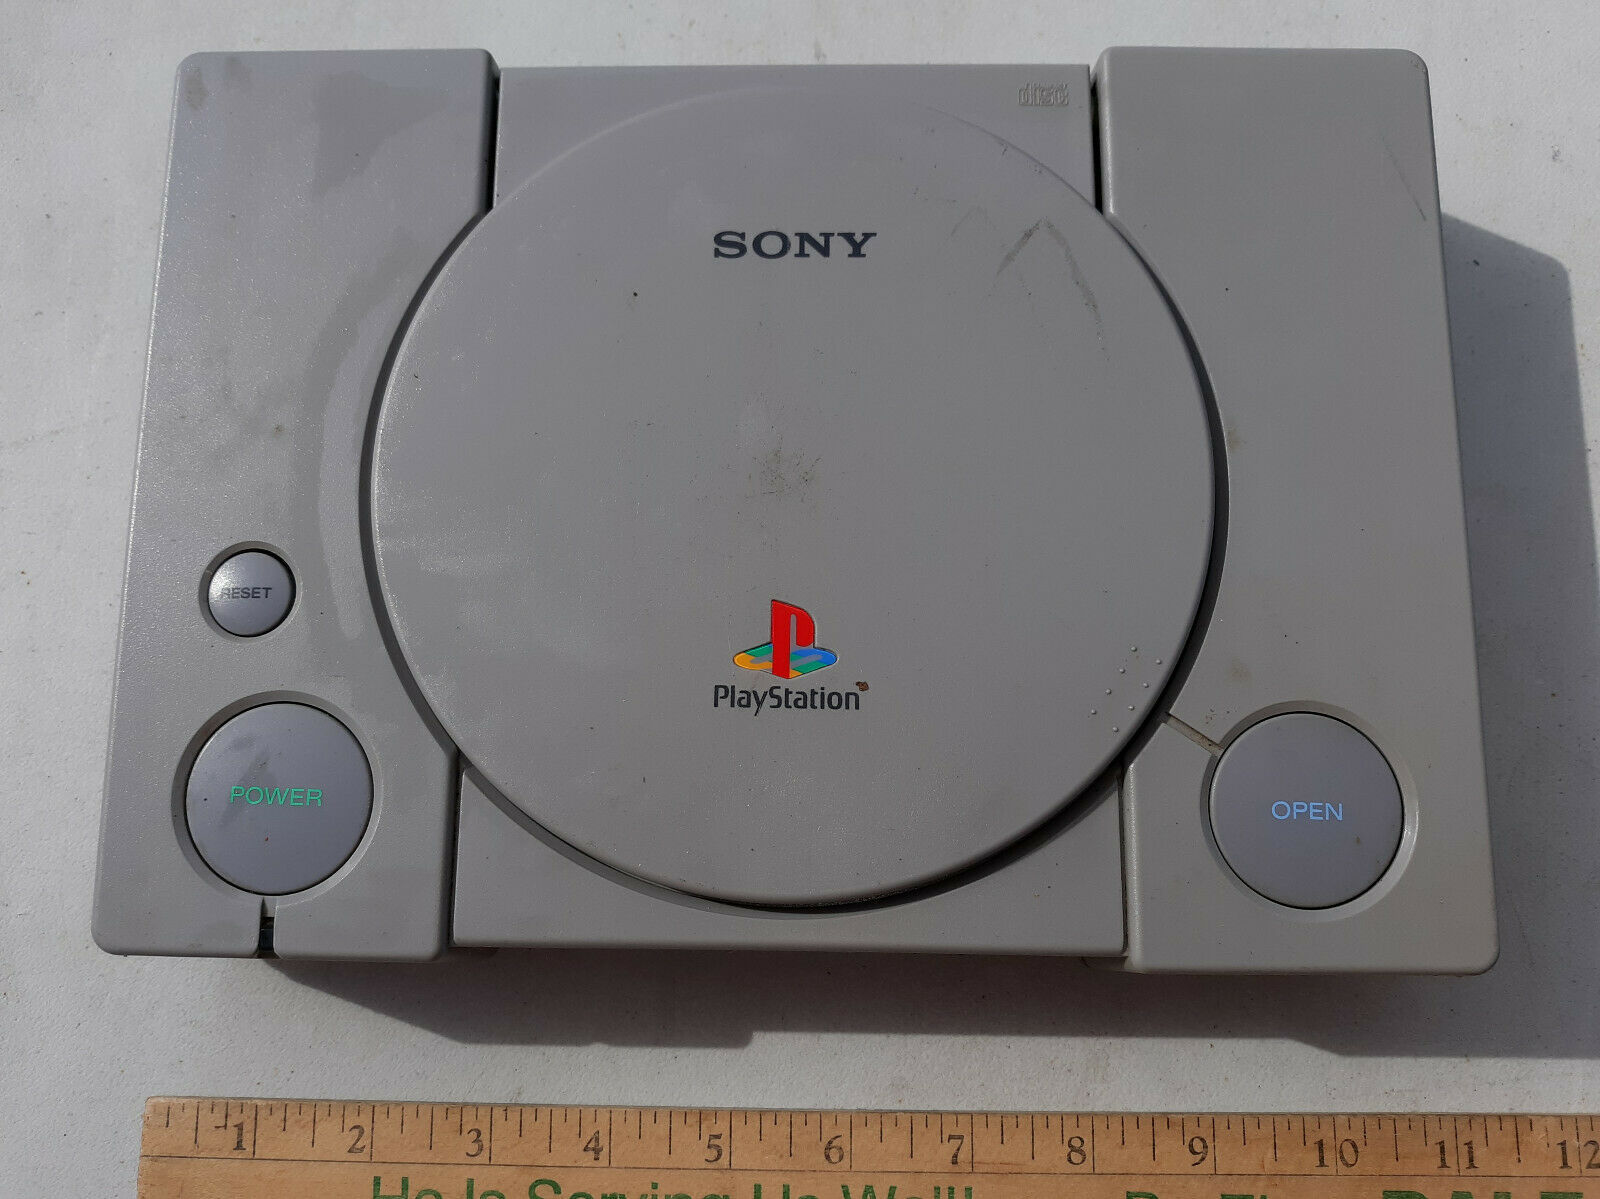 Primary image for 21HH00 SONY PLAYSTATION, DOES NOT WORK, FOR PARTS ONLY, NO RETURNS